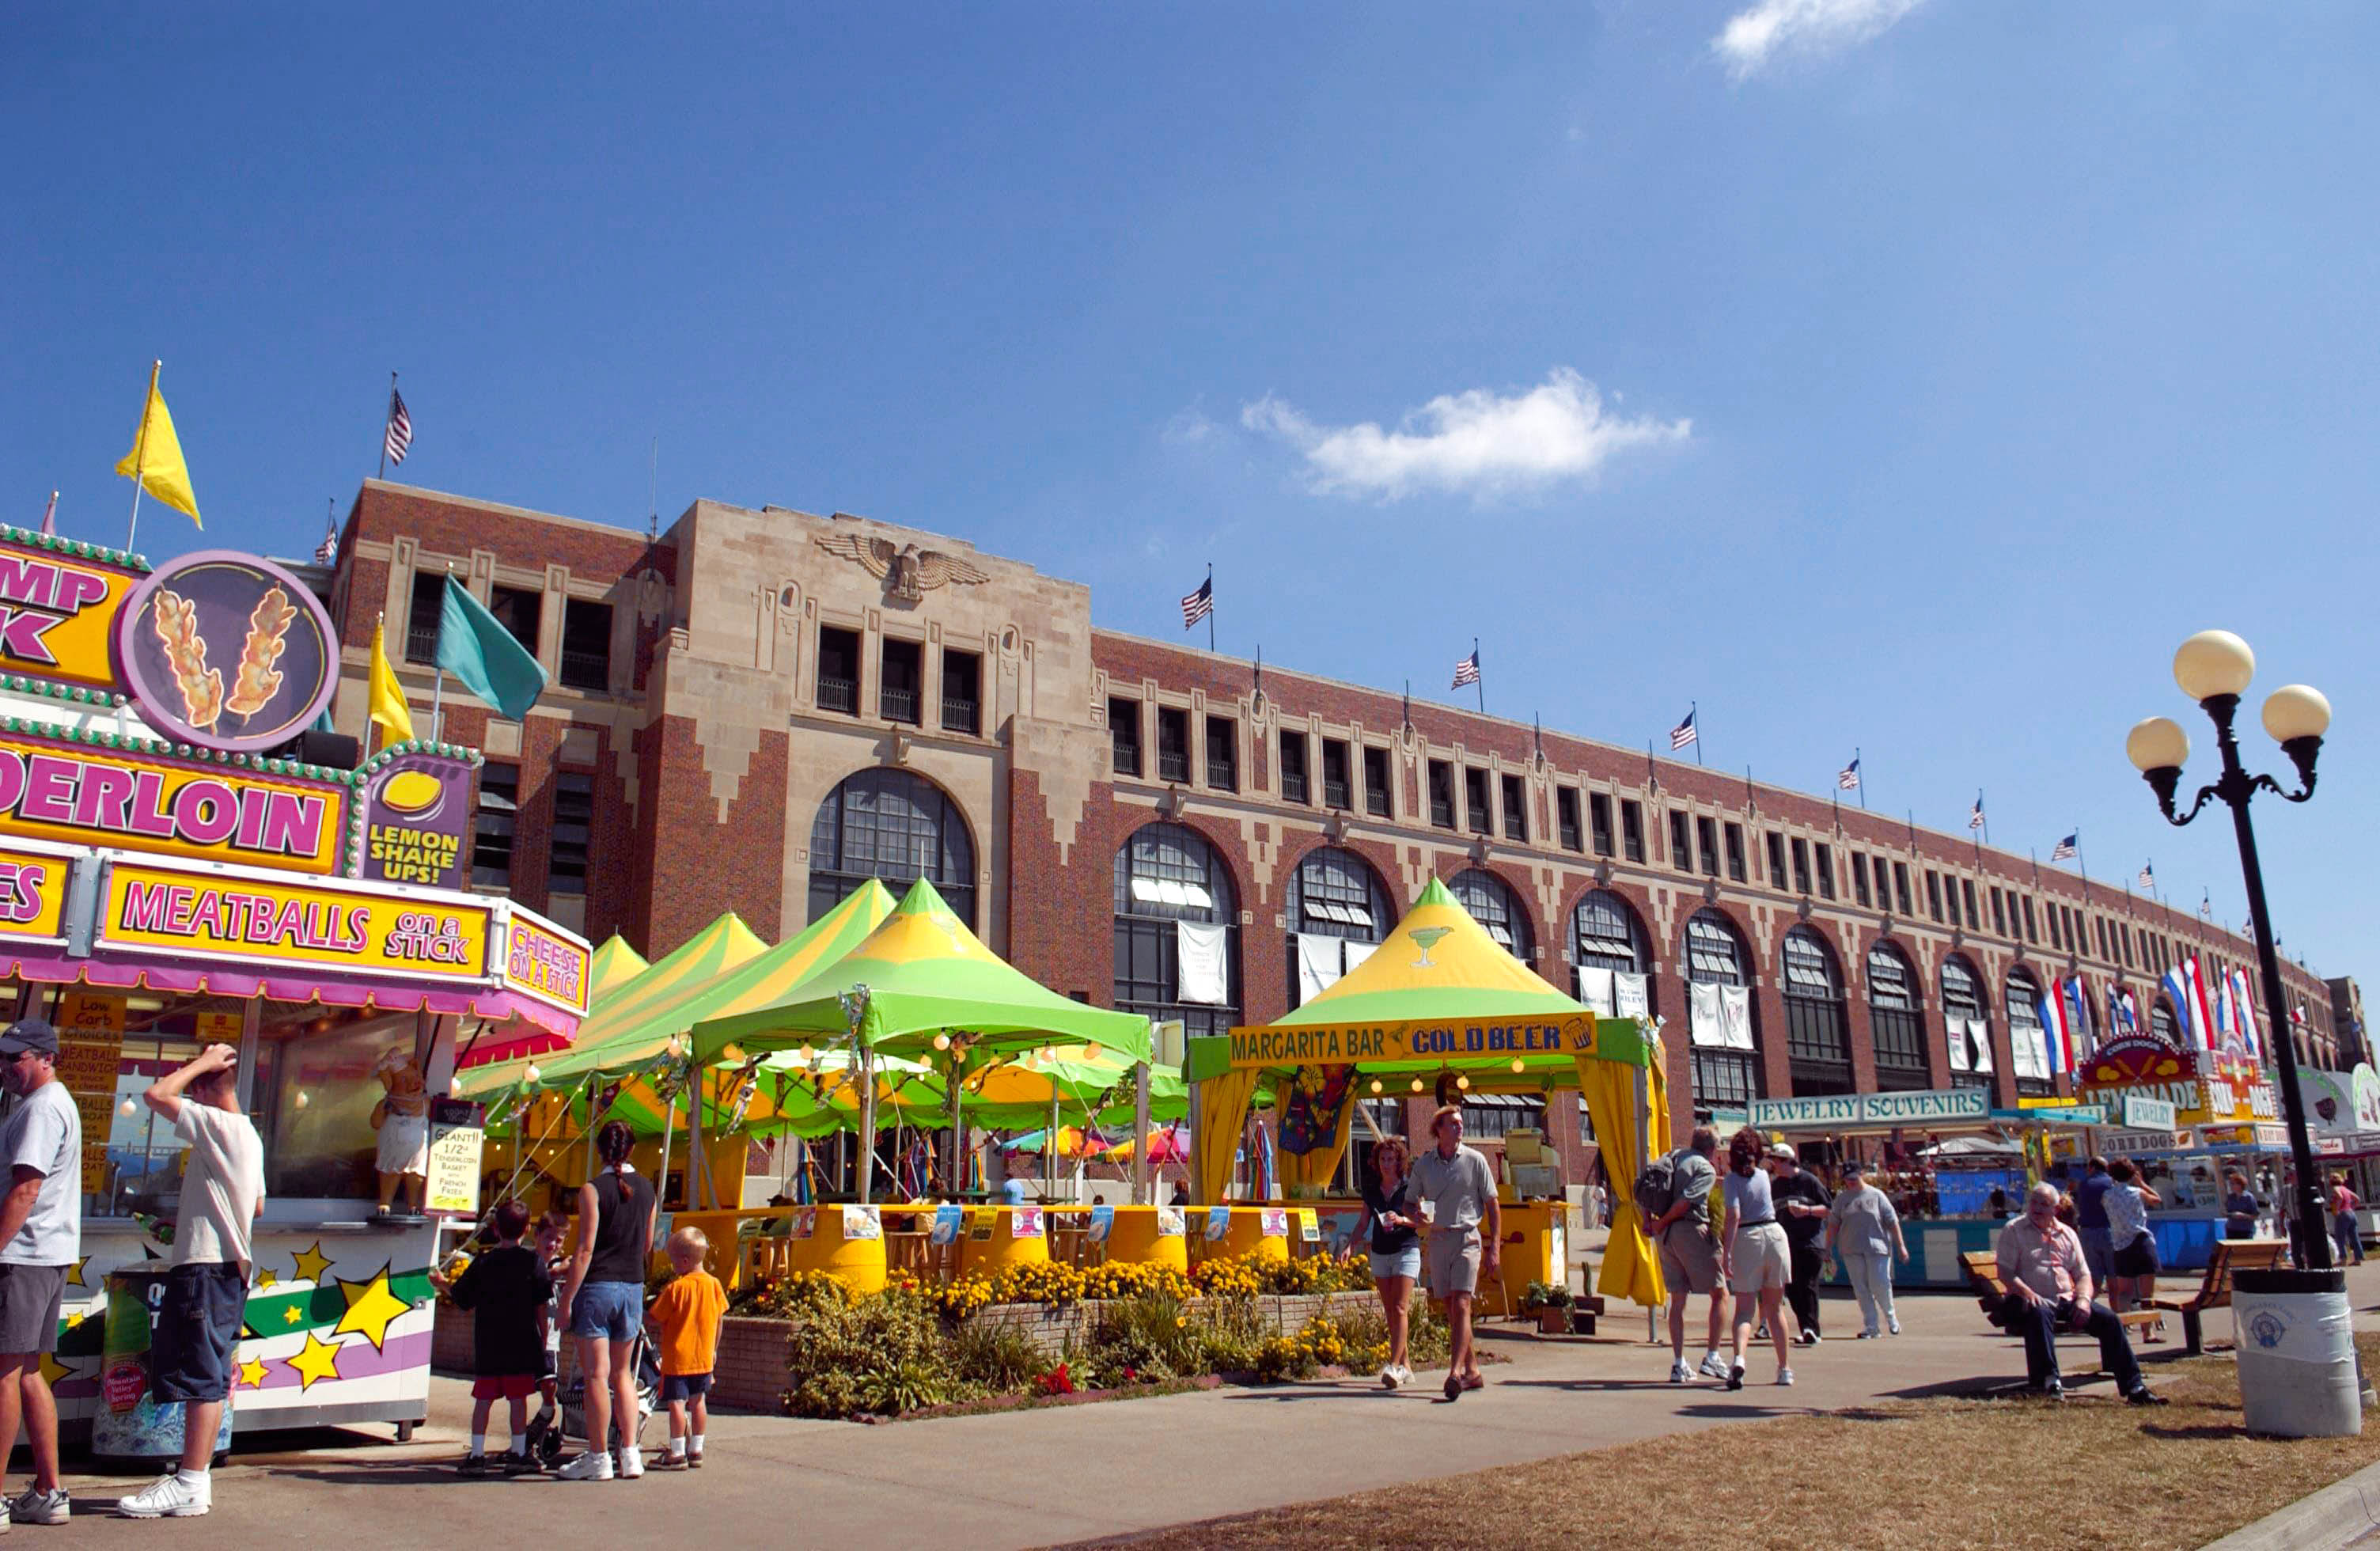 Food and the Iowa State Fair go hand in hand. This year